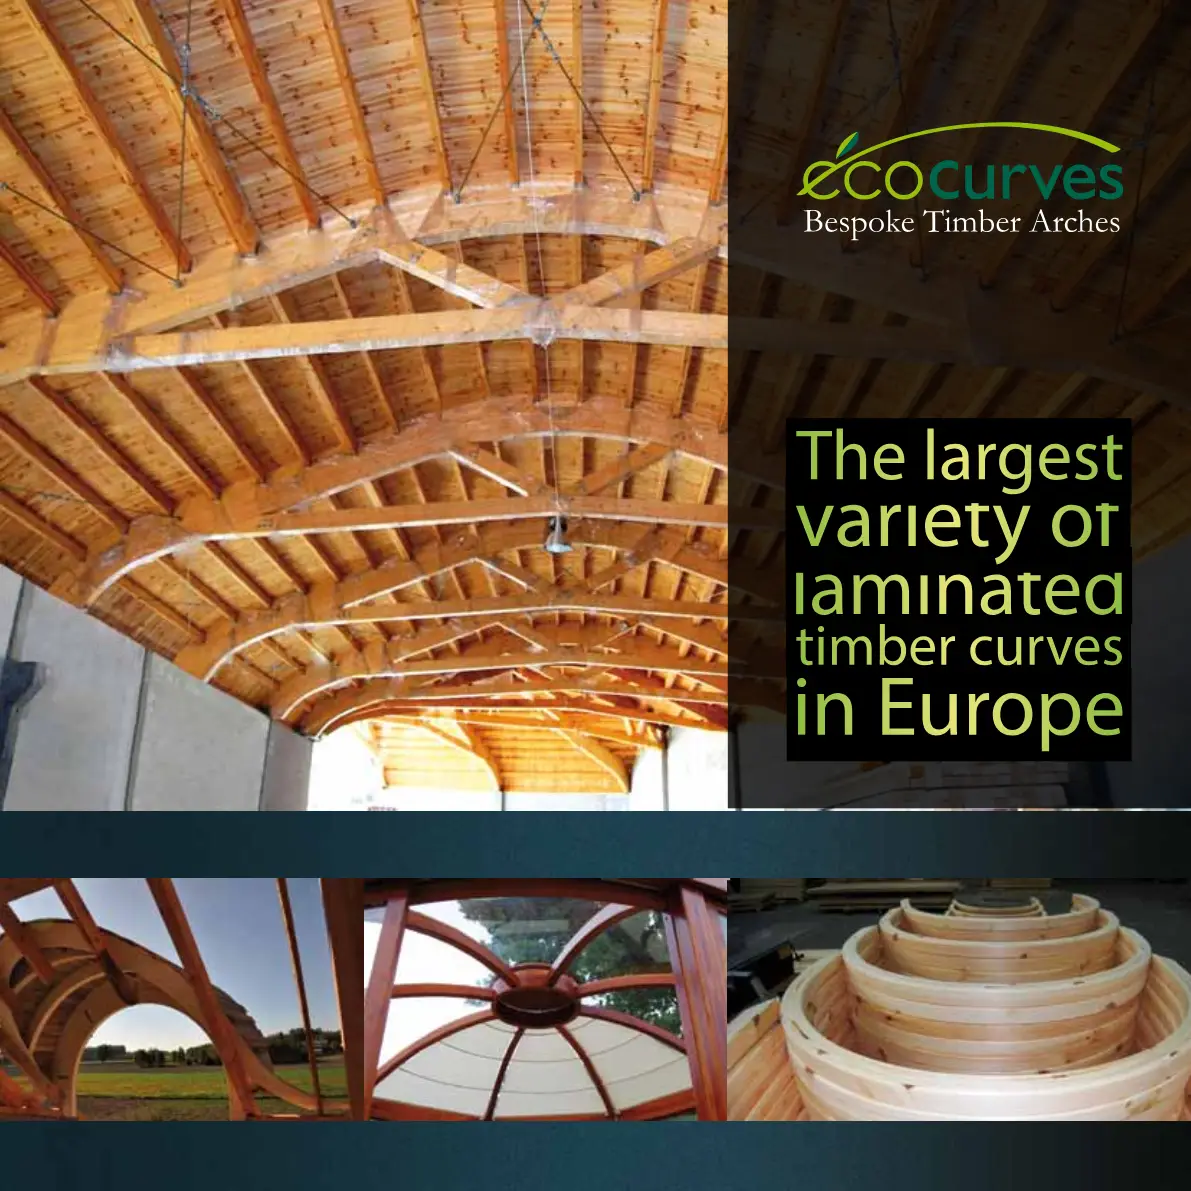 Brochure_Ecocurves_by_Jagram_Bespoke_Timber_Arches